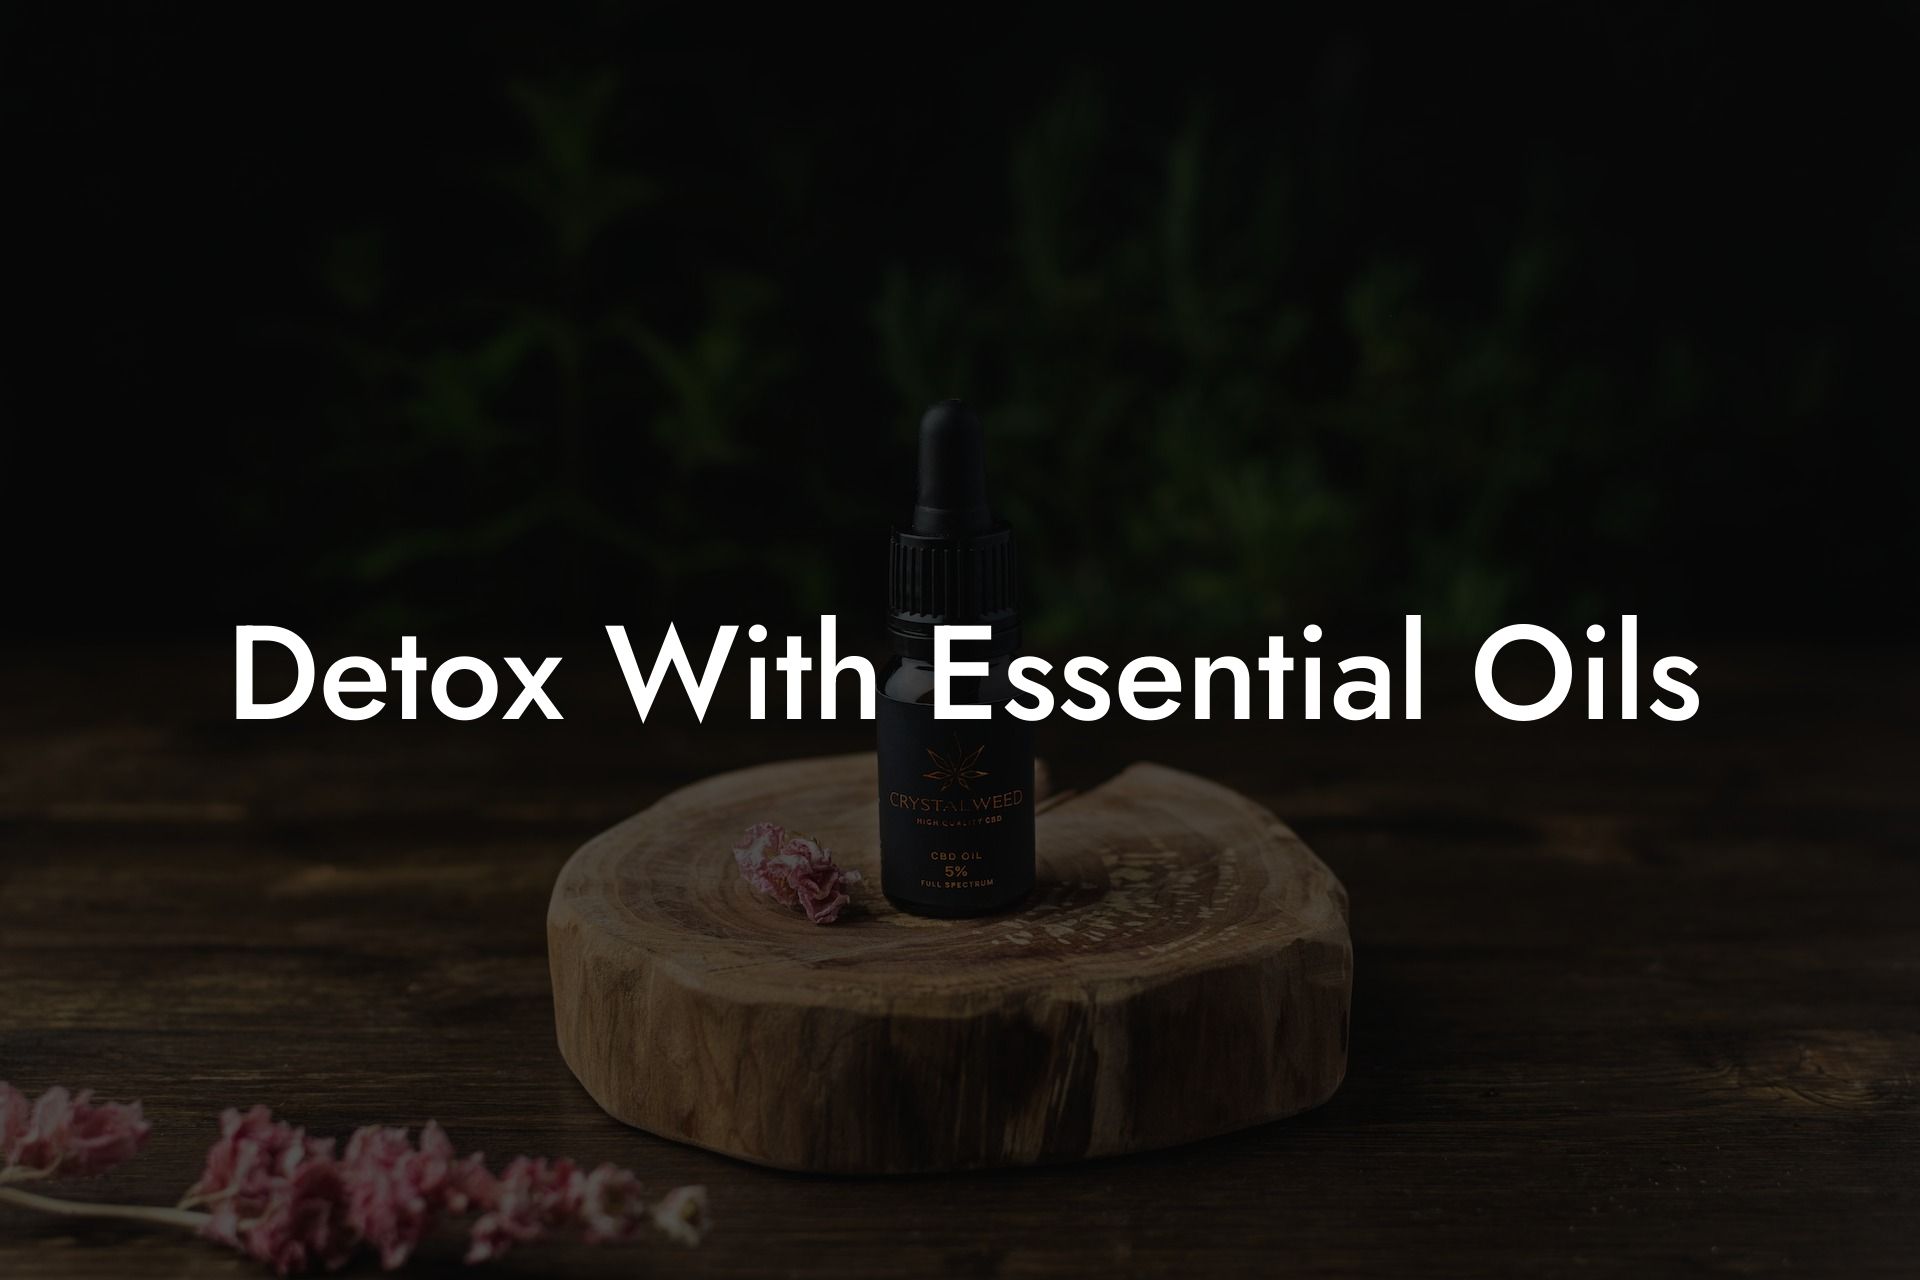 Detox With Essential Oils